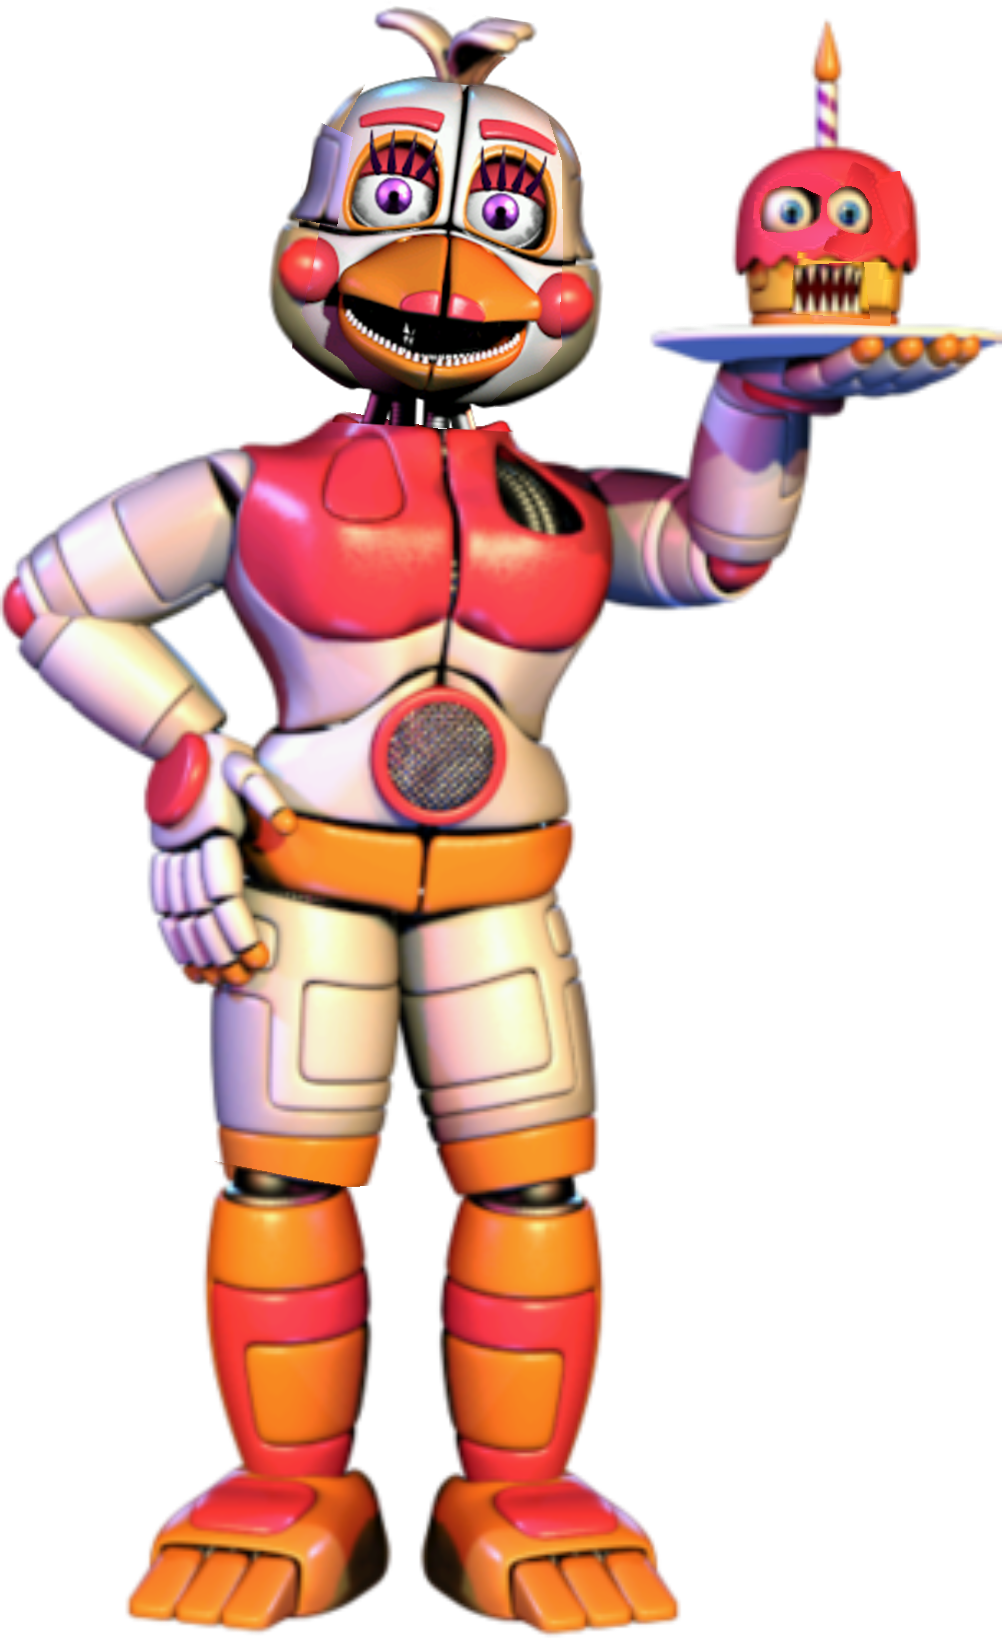 Funtime Chica The Fire Performer by Wolf-con-f on DeviantArt